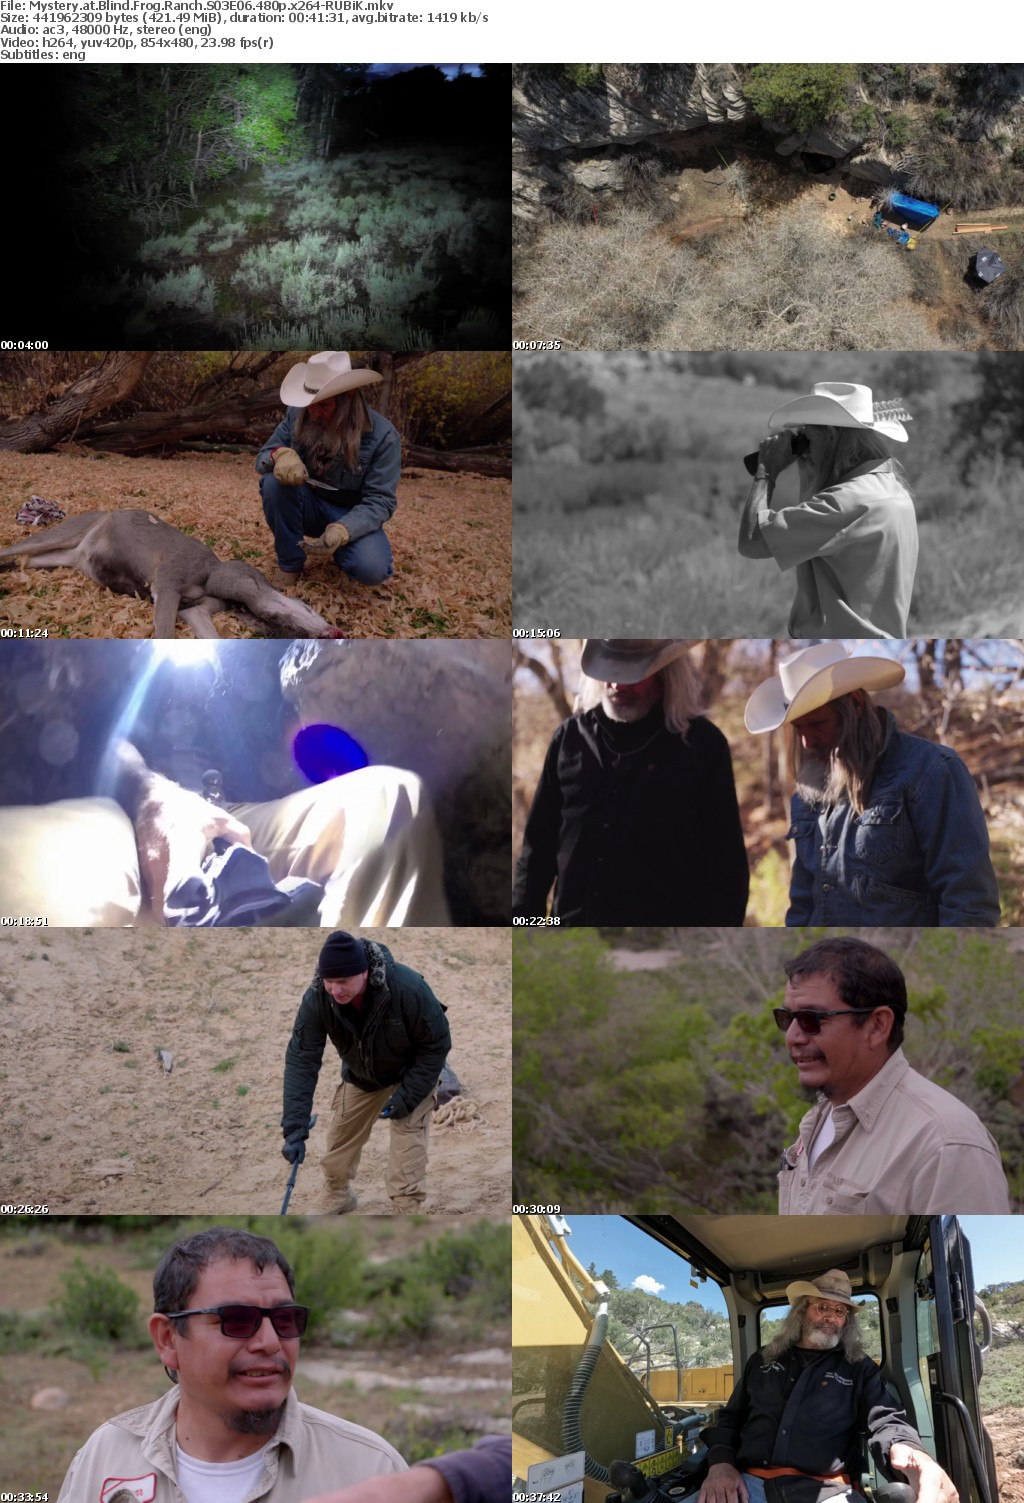 Mystery at Blind Frog Ranch S03E06 480p x264-RUBiK